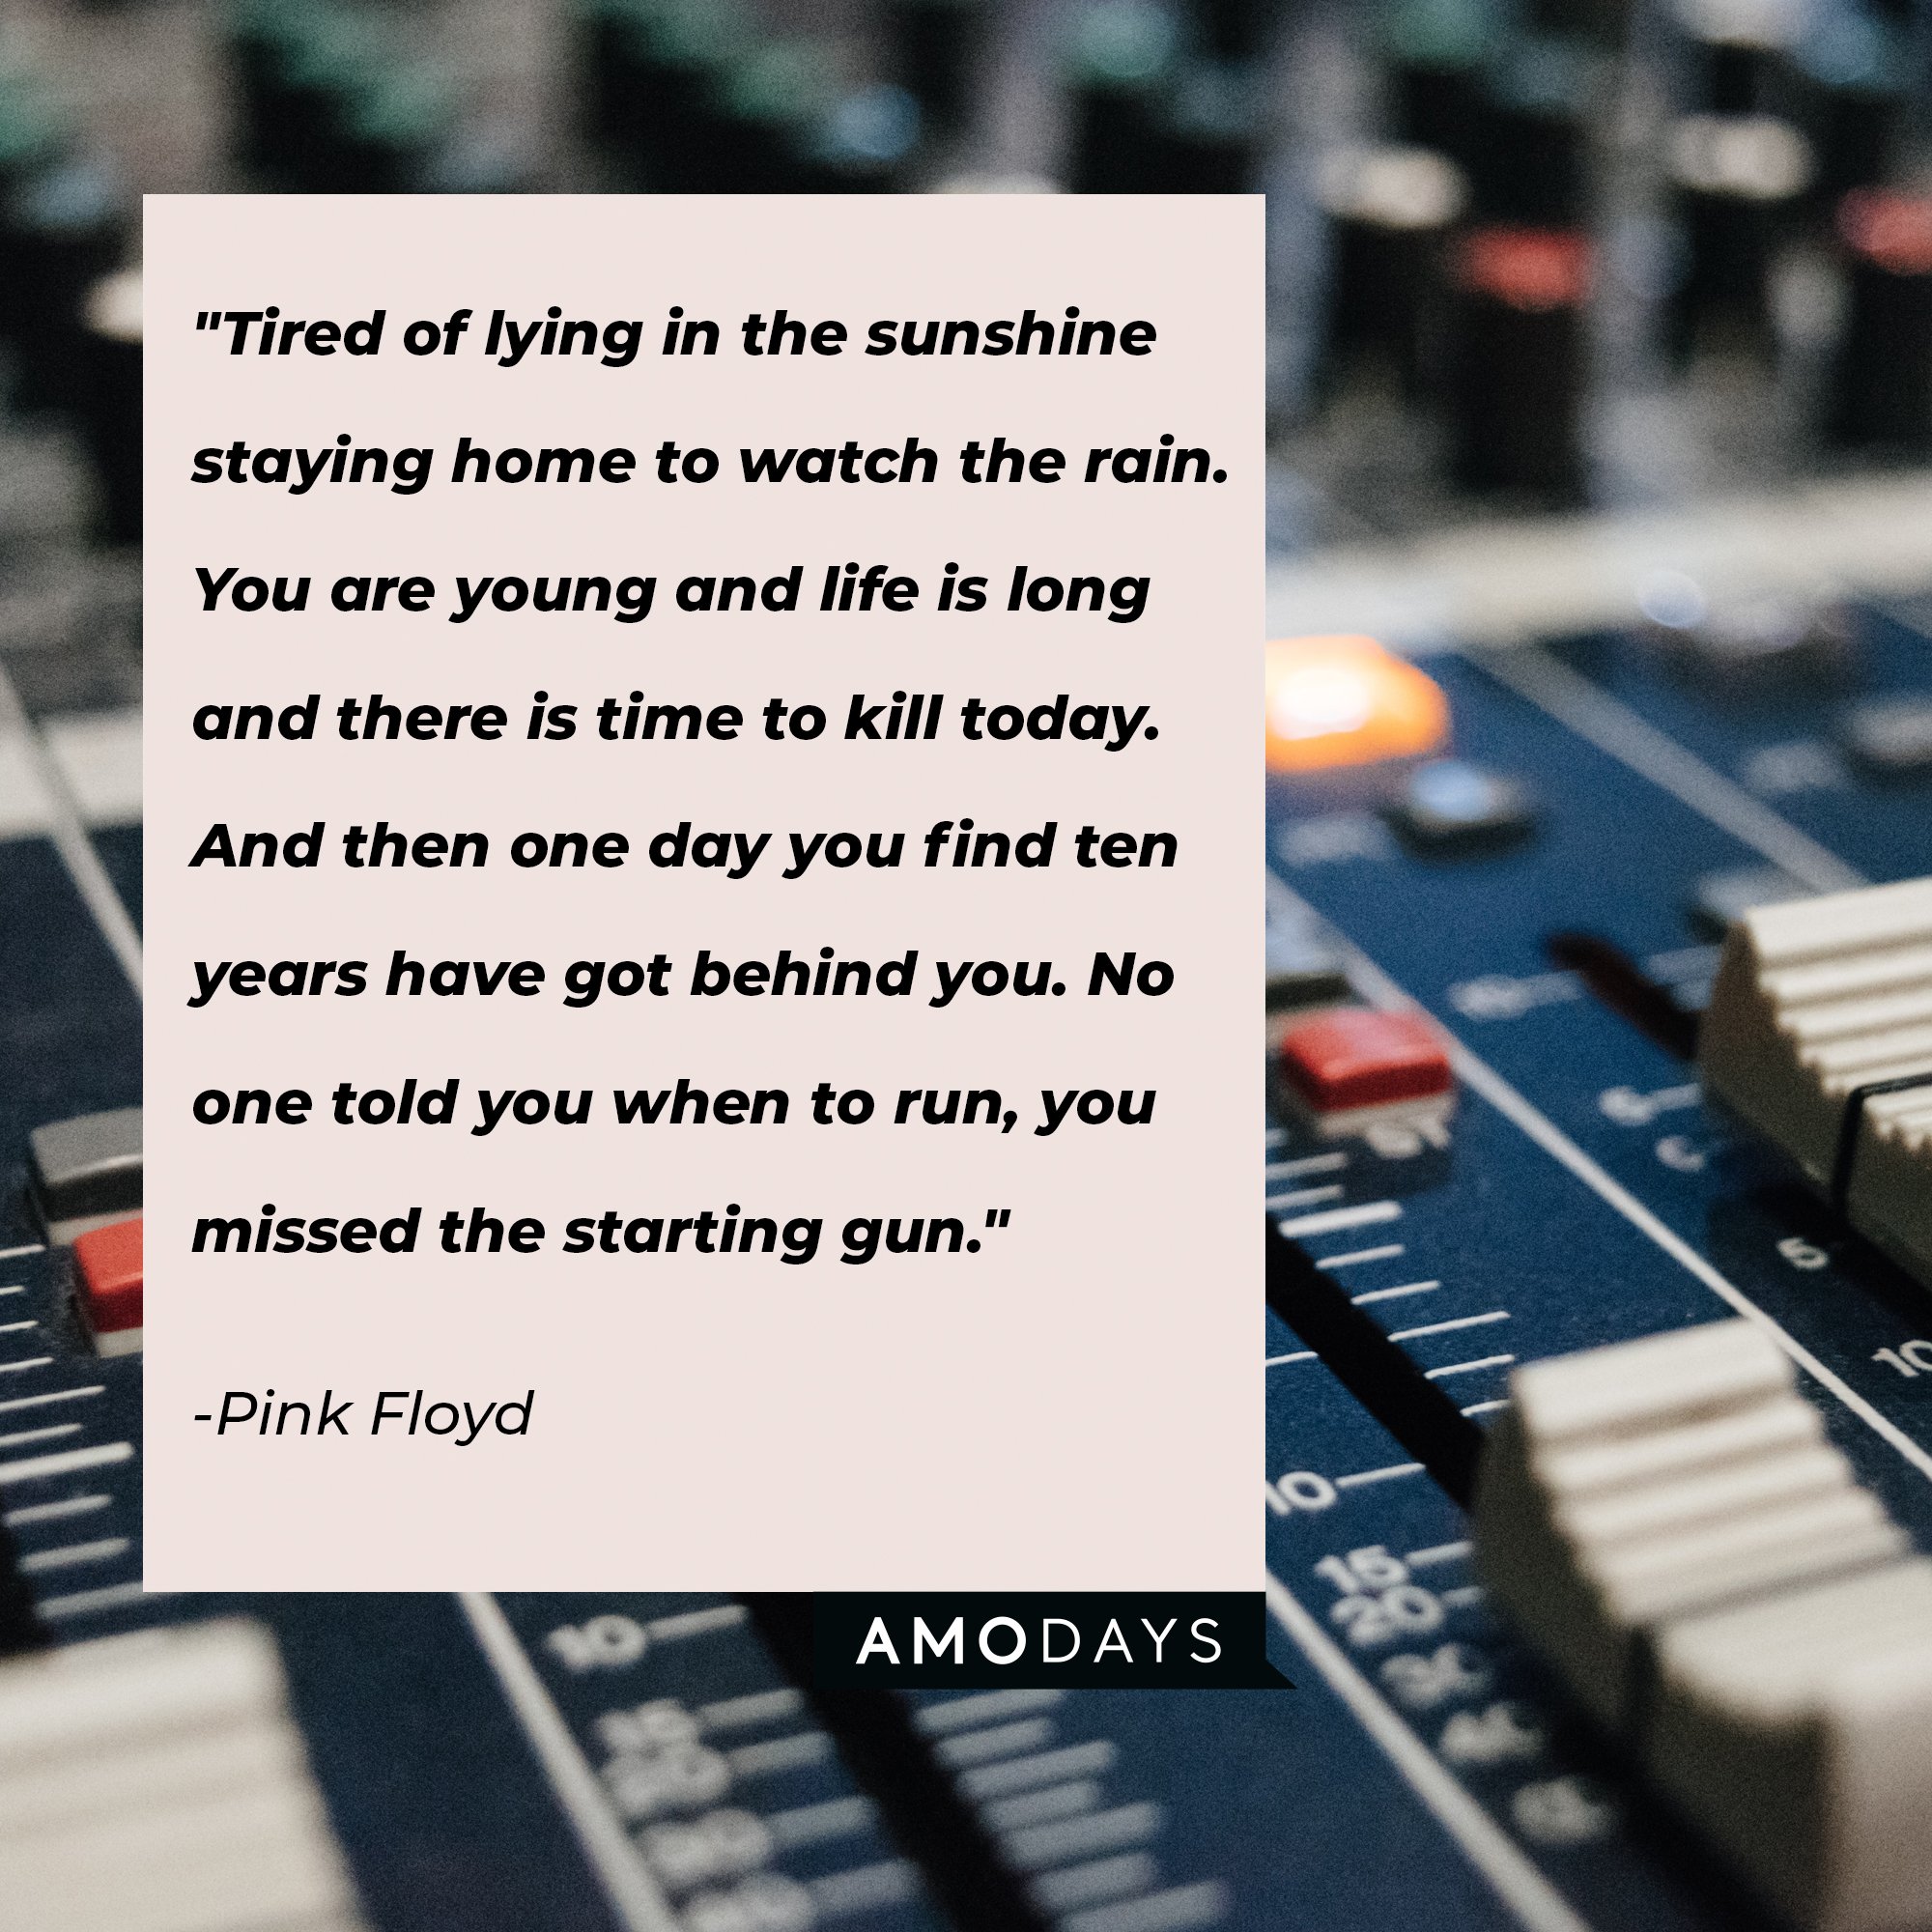 Pink Floyd's quote: "Tired of lying in the sunshine staying home to watch the rain. You are young and life is long and there is time to kill today. And then one day you find ten years have got behind you. No one told you when to run, you missed the starting gun." | Image: AmoDays